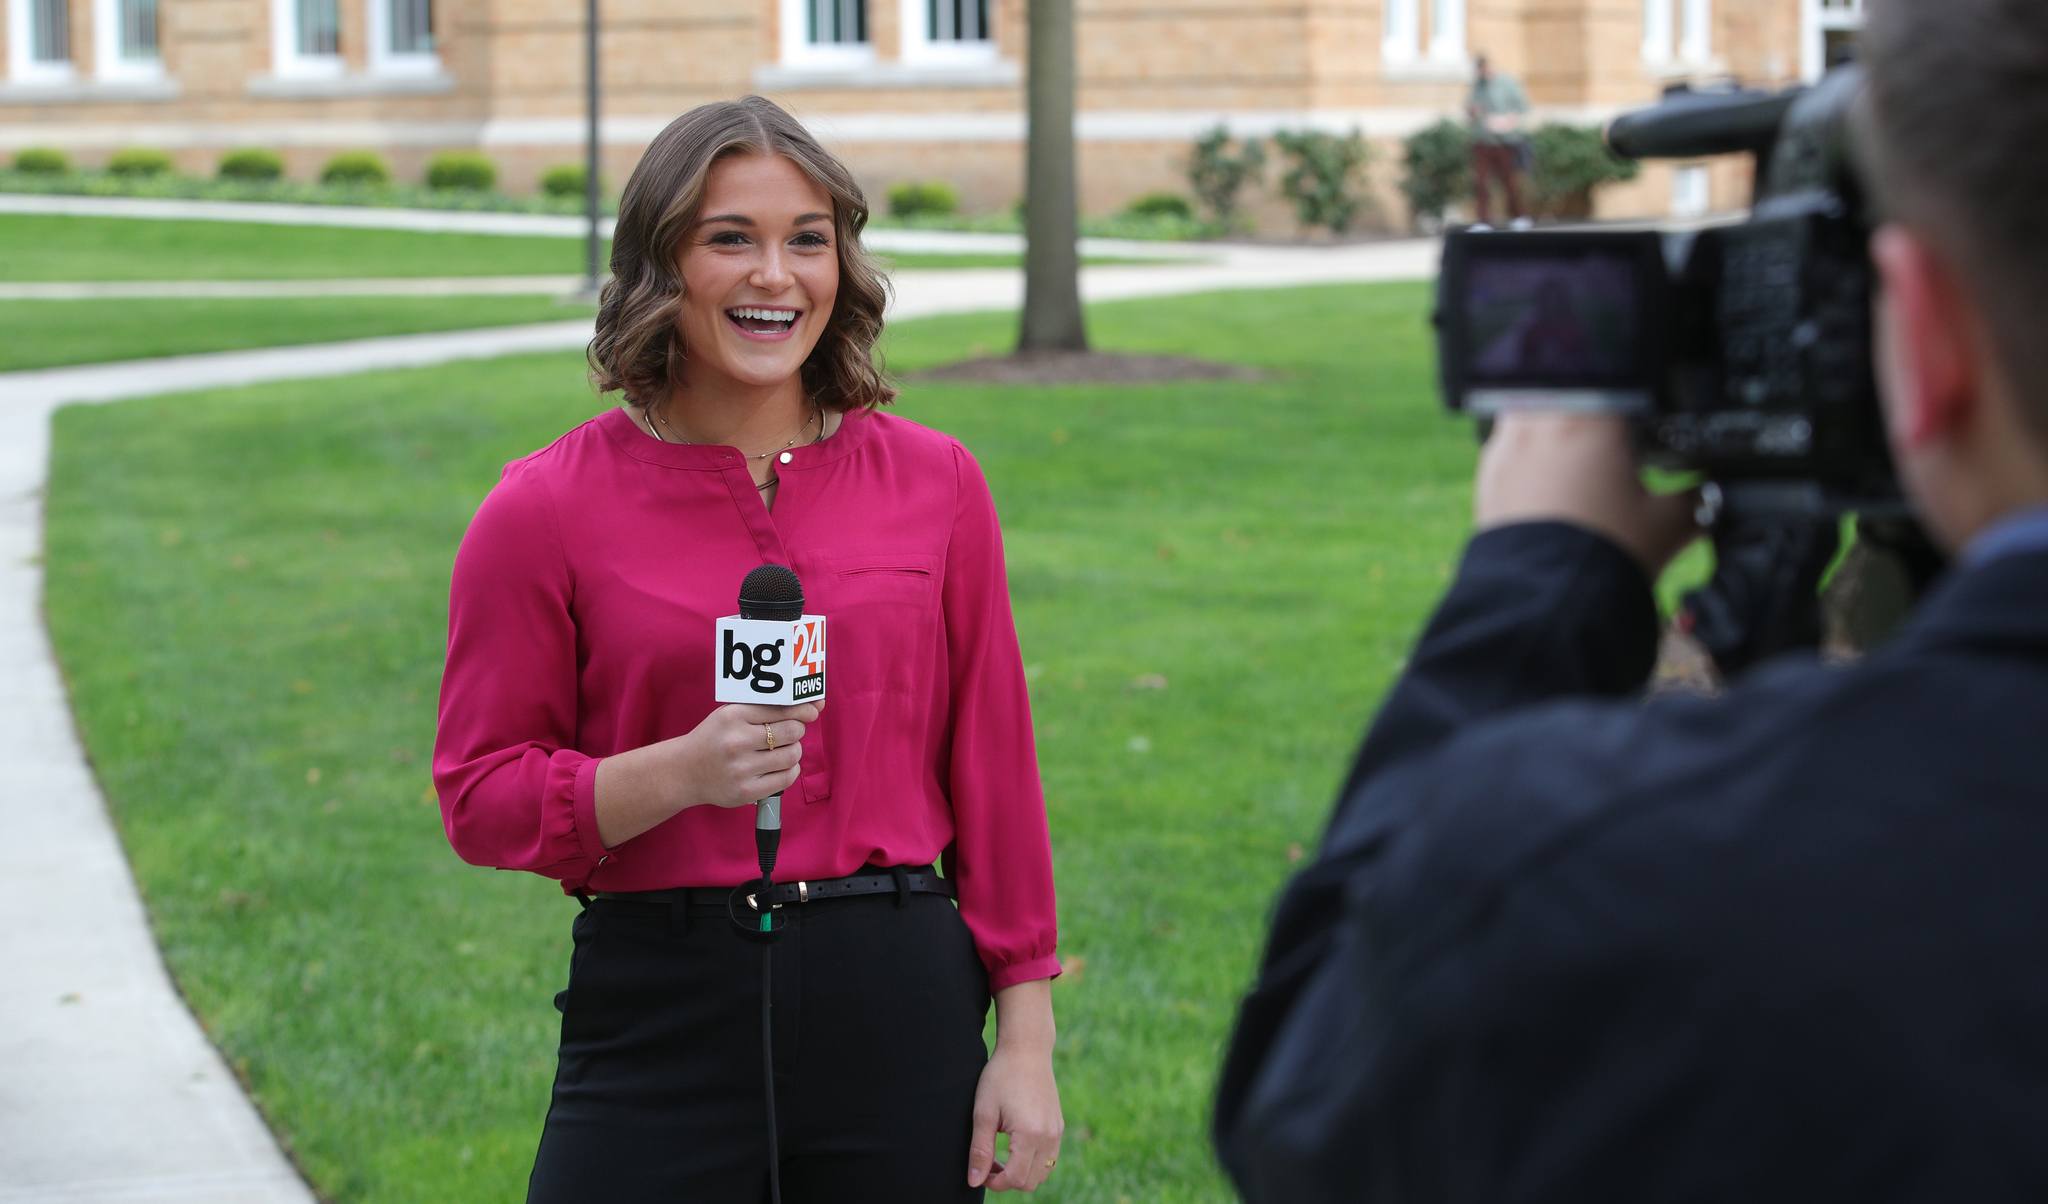 Journalism student holds a microphone while being filmed near the Bowen Thompson Union